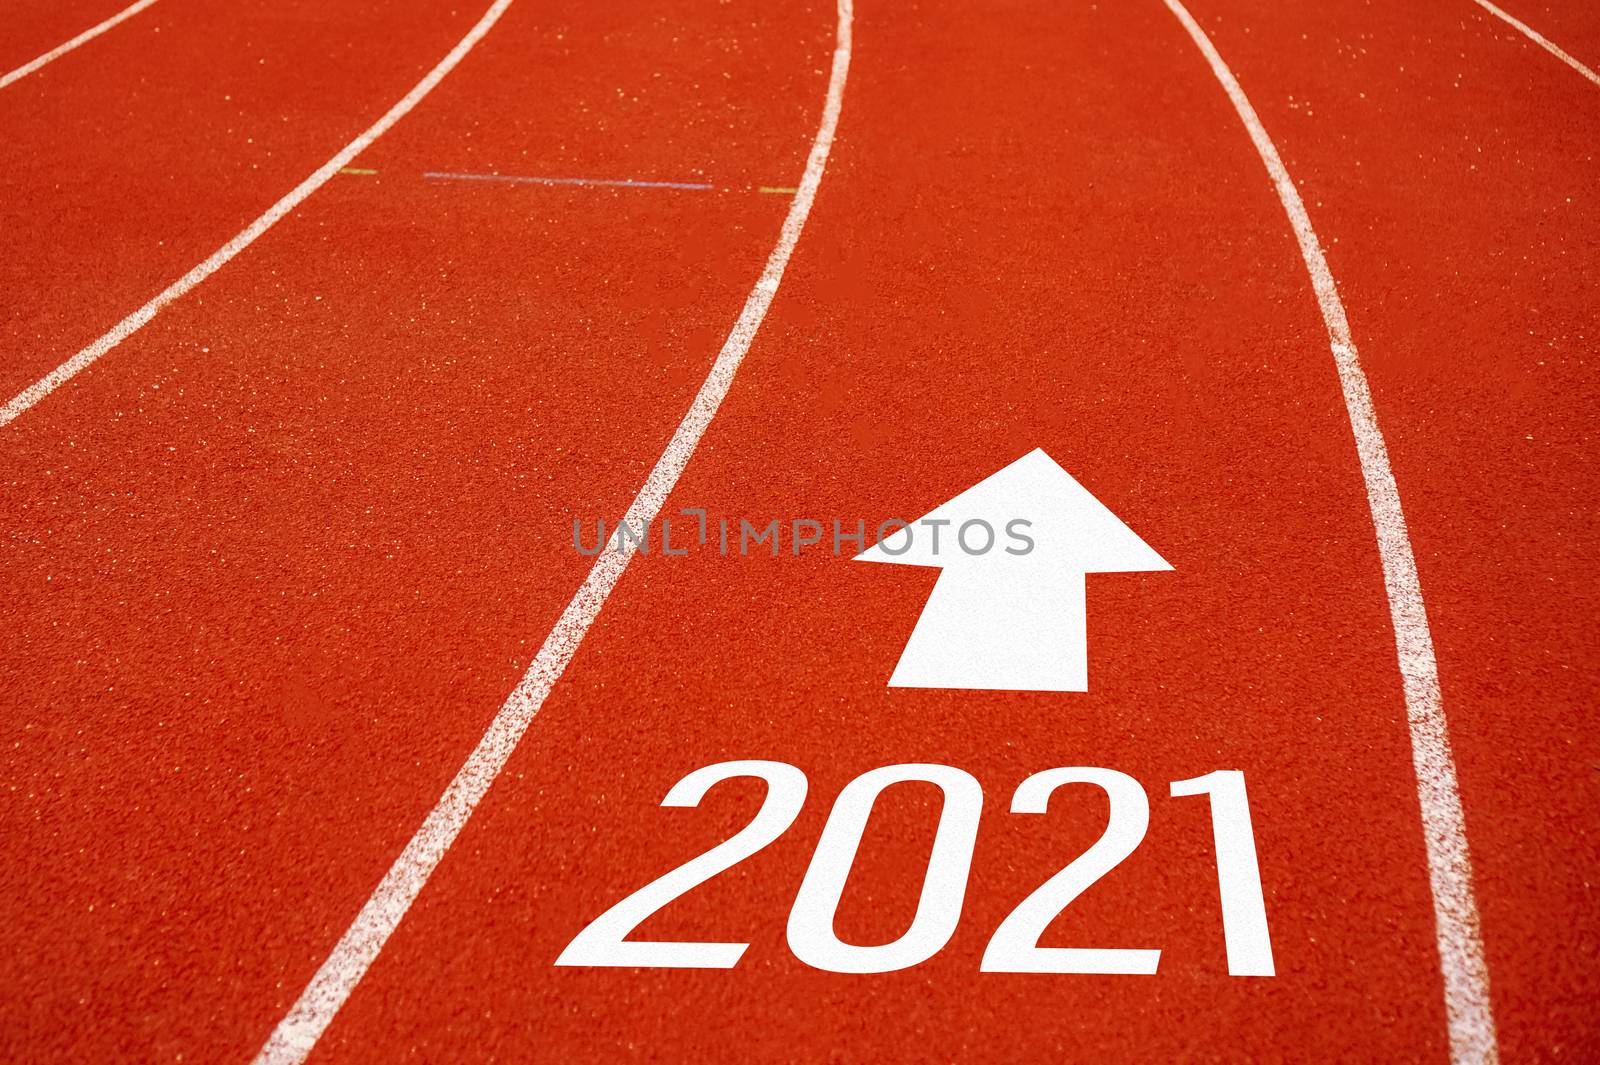 Start line to 2021 on running court represents the beginning of a journey to the destination in business planning, strategy and challenge or career path, opportunity. by Suwant